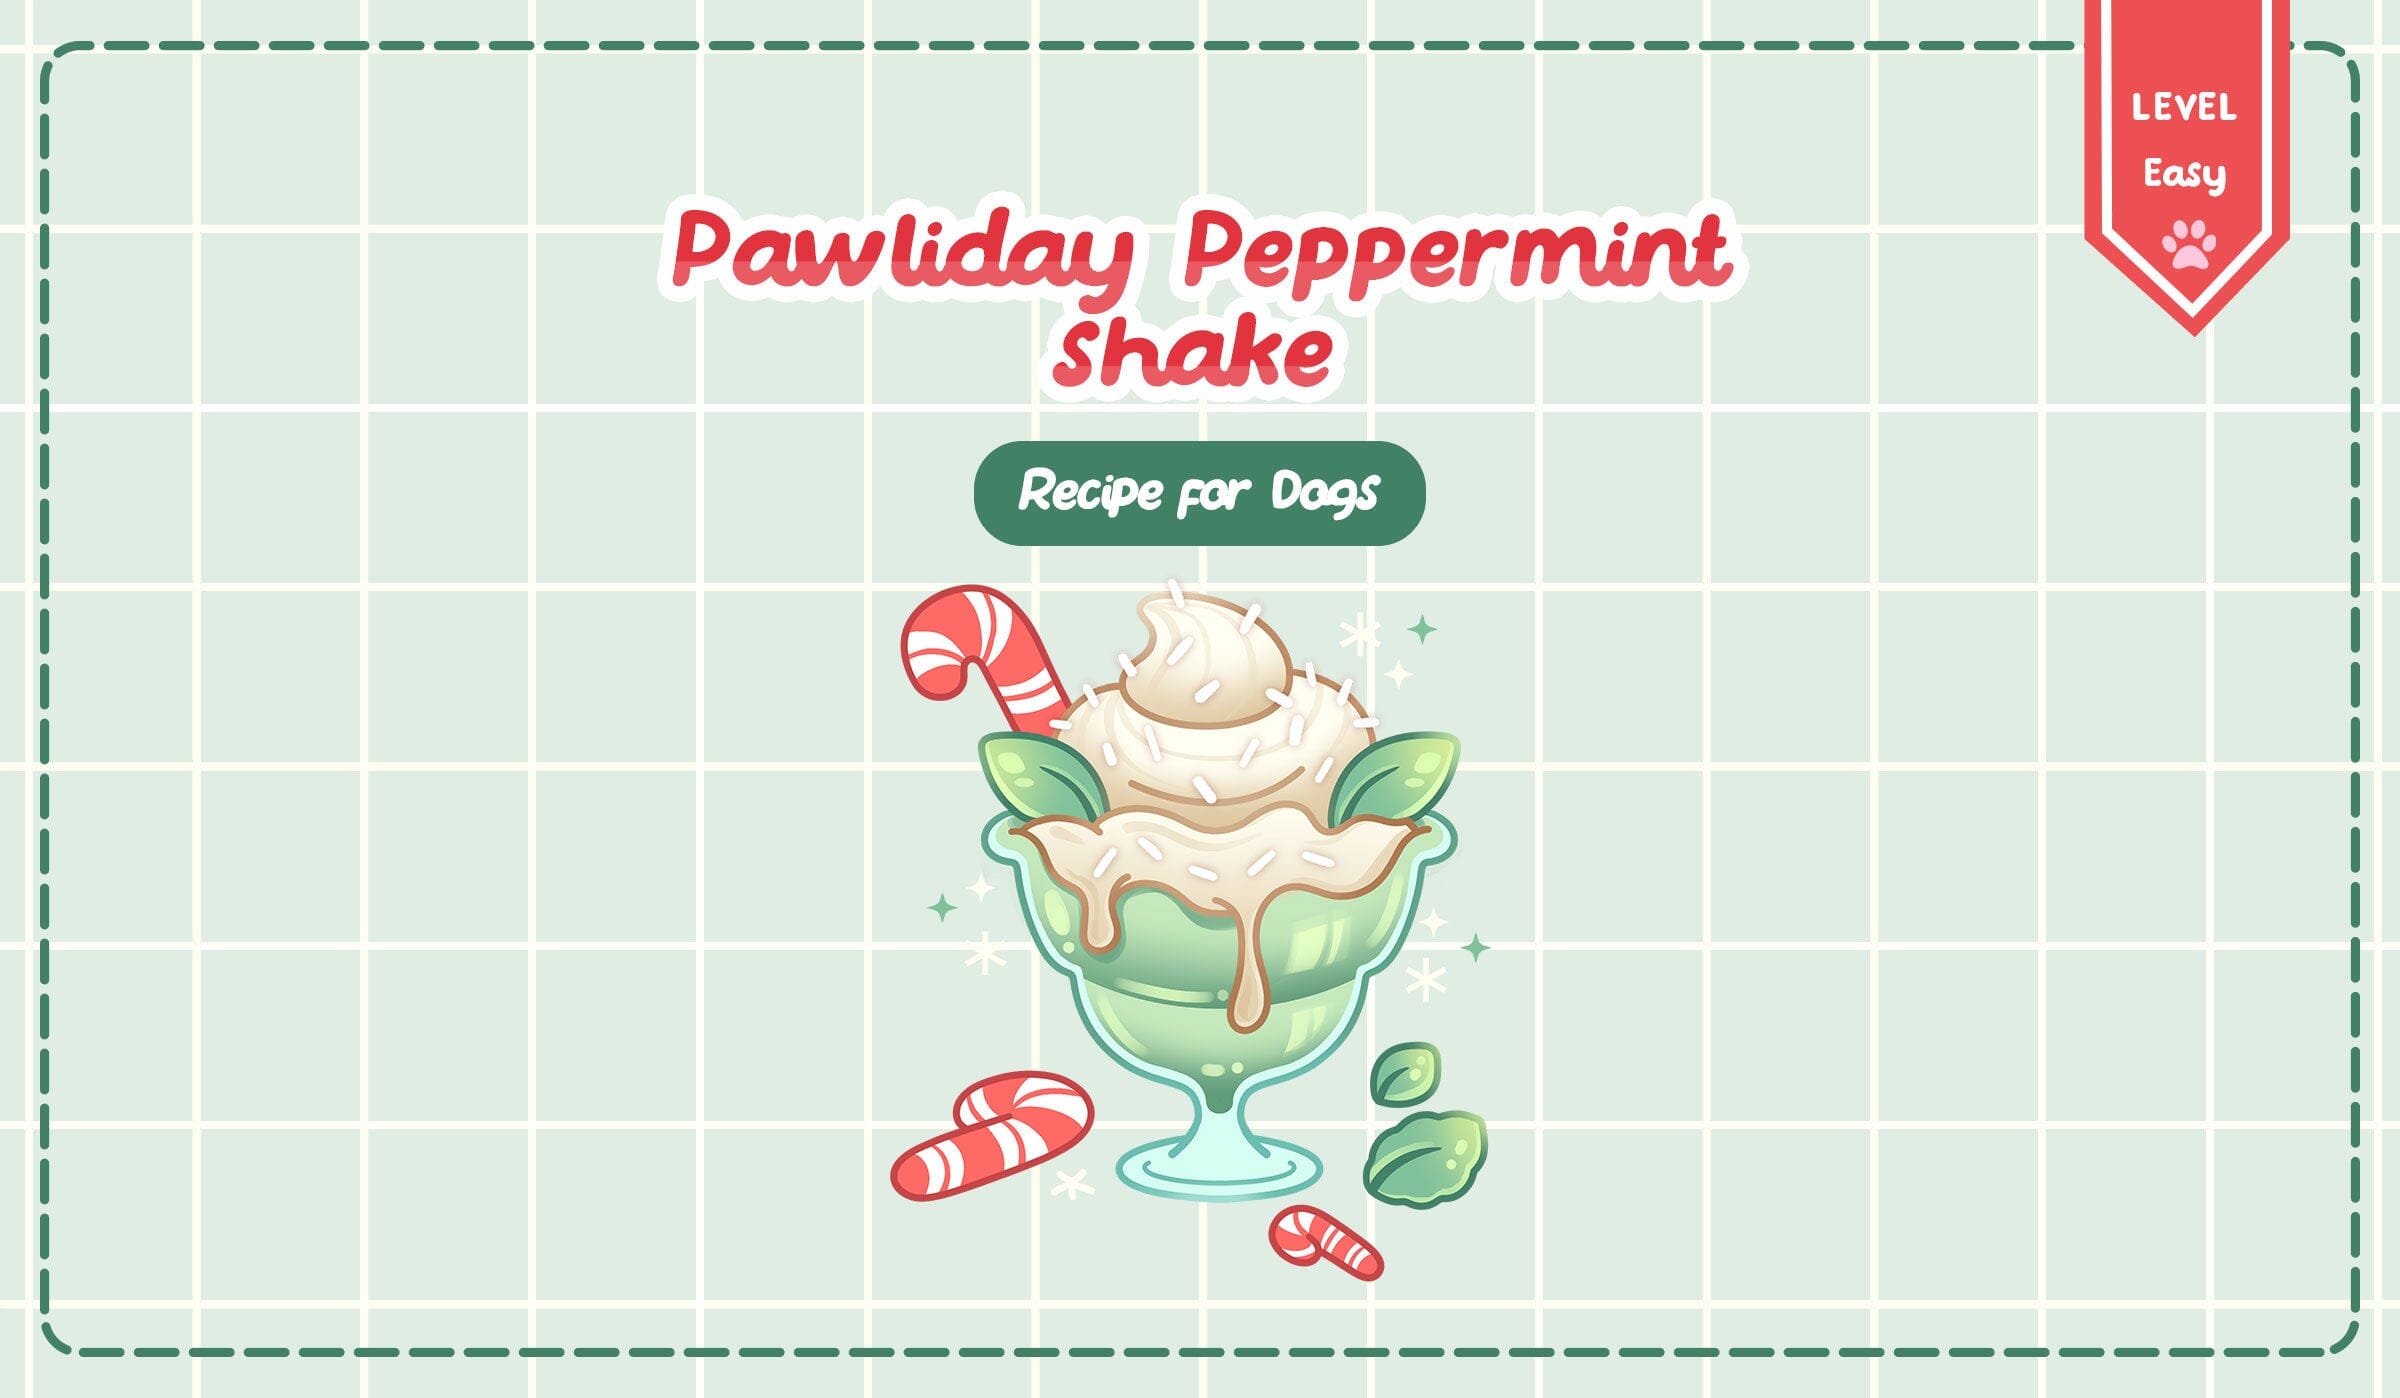 How to Make a Pawliday Peppermint Shake